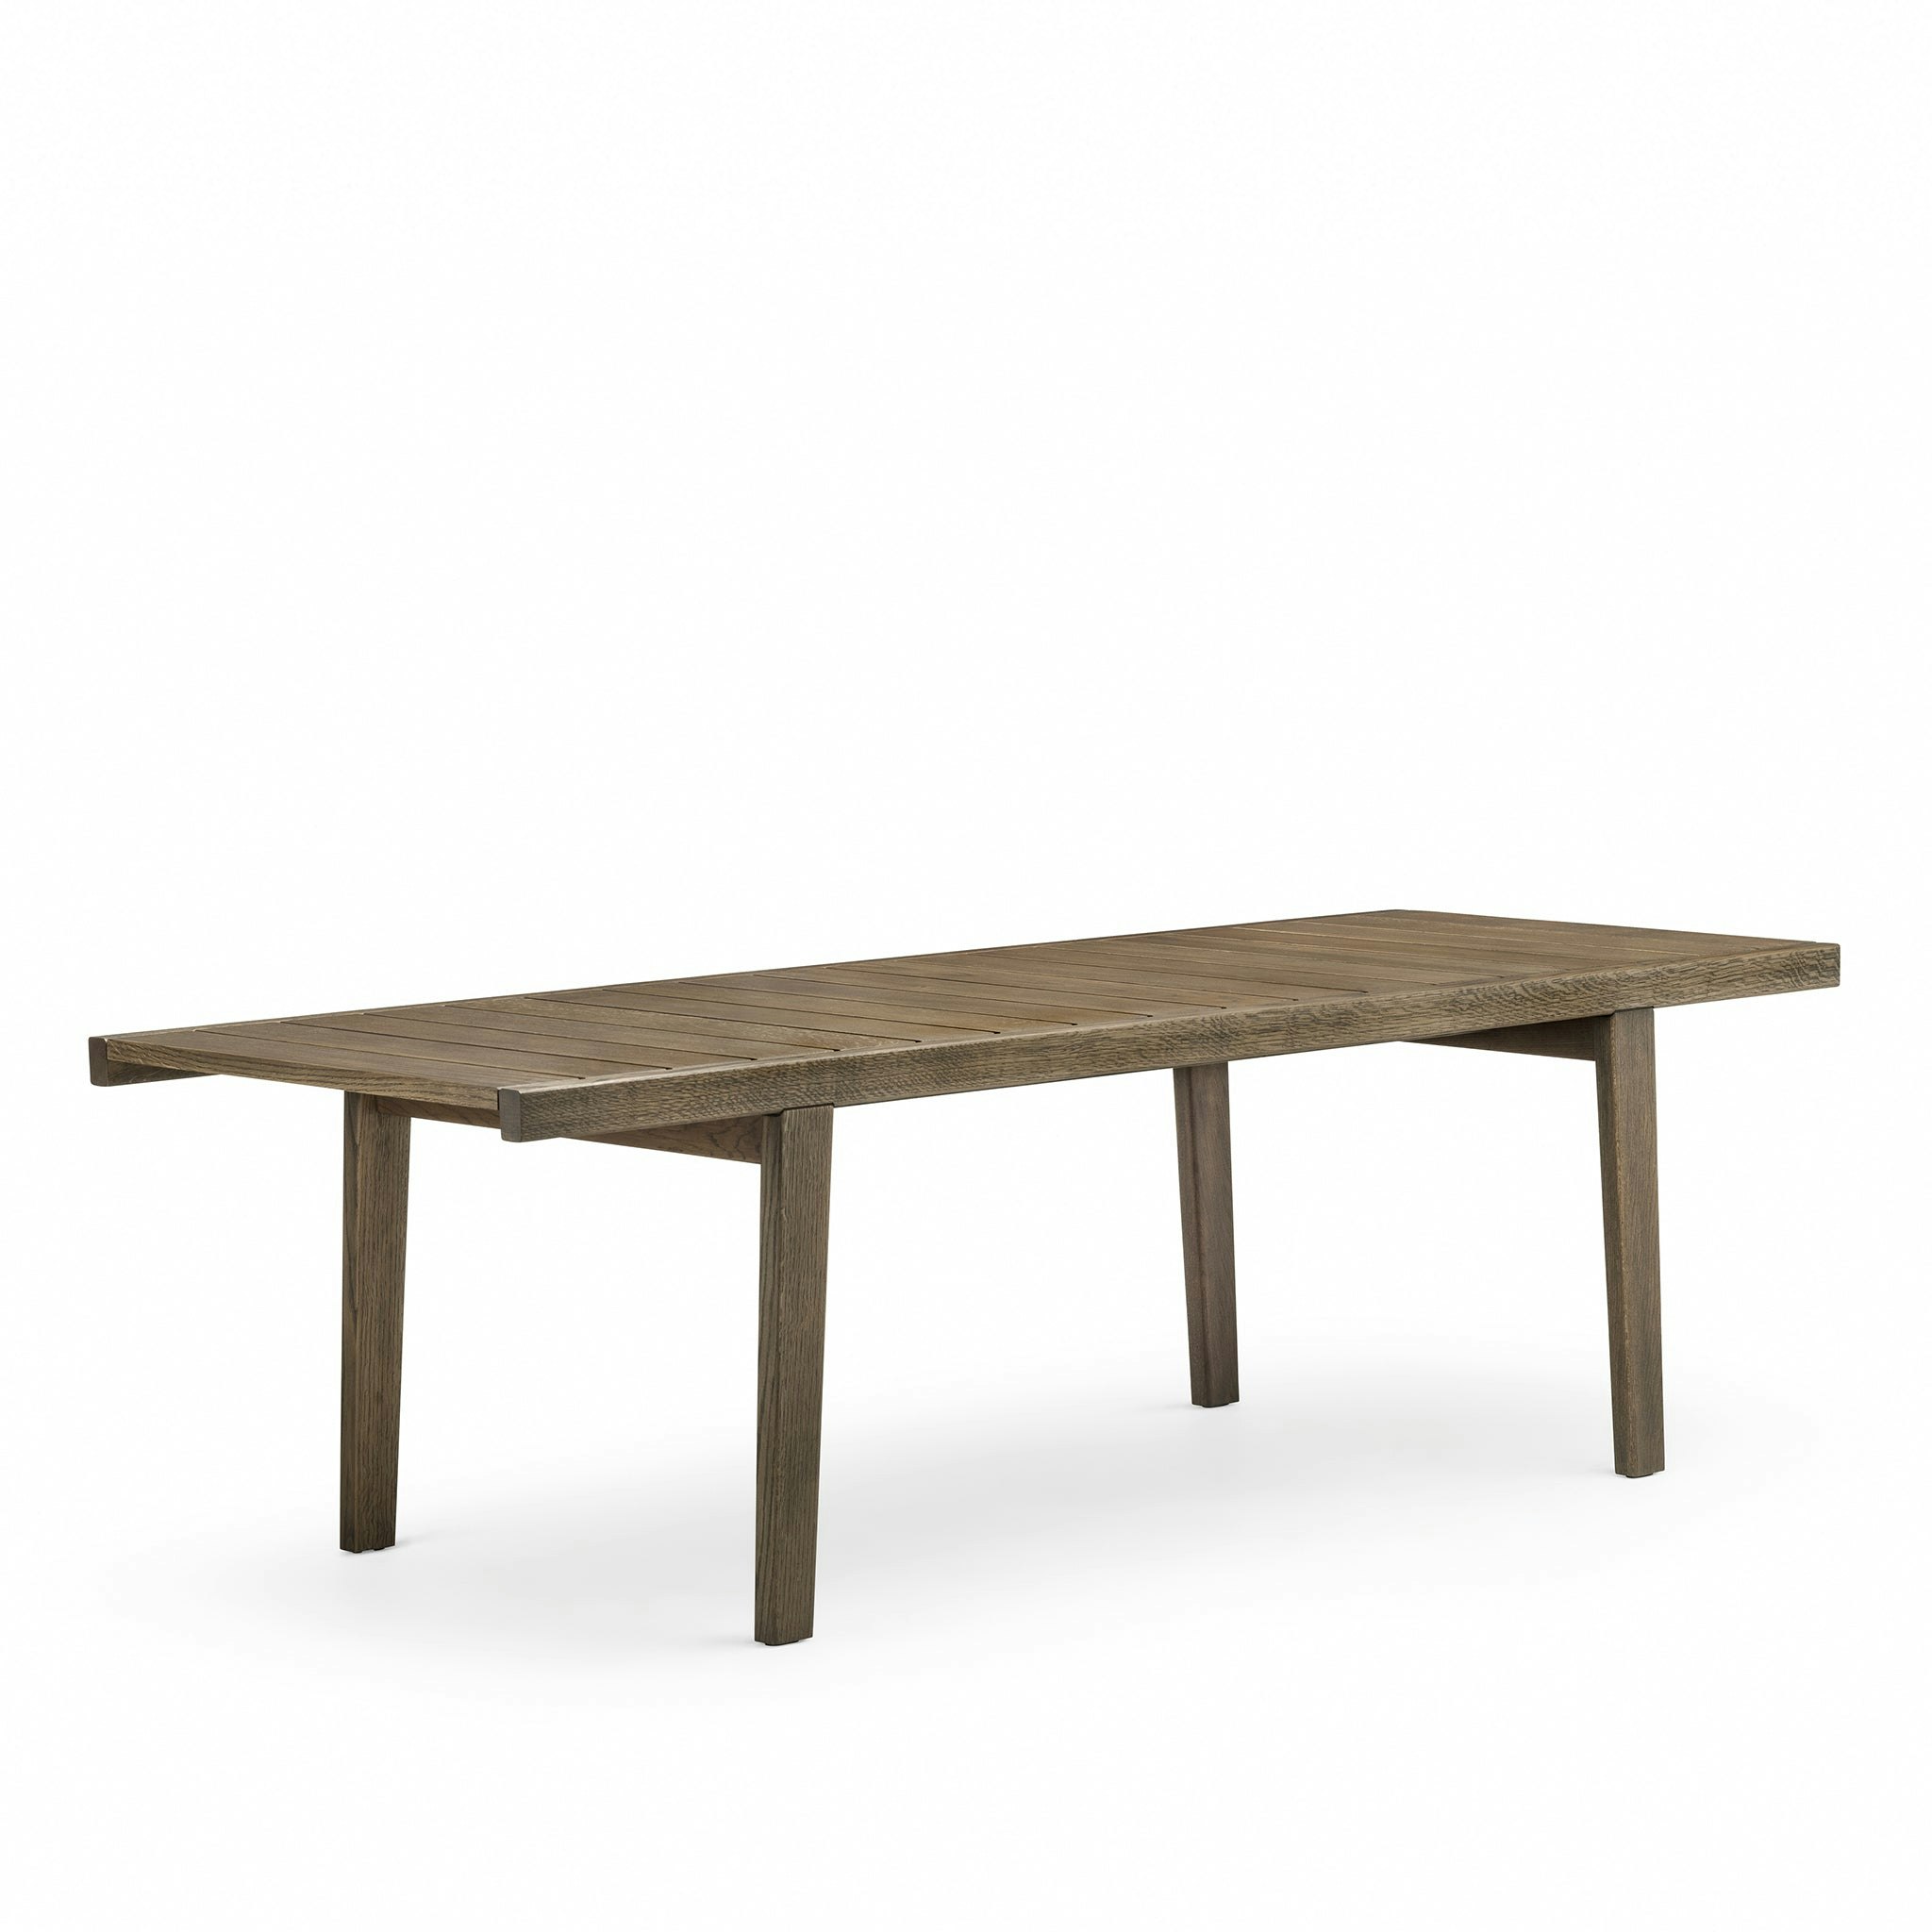 98.6°F Outdoor Dining Table by Lyndon Neri and Rossana Hu